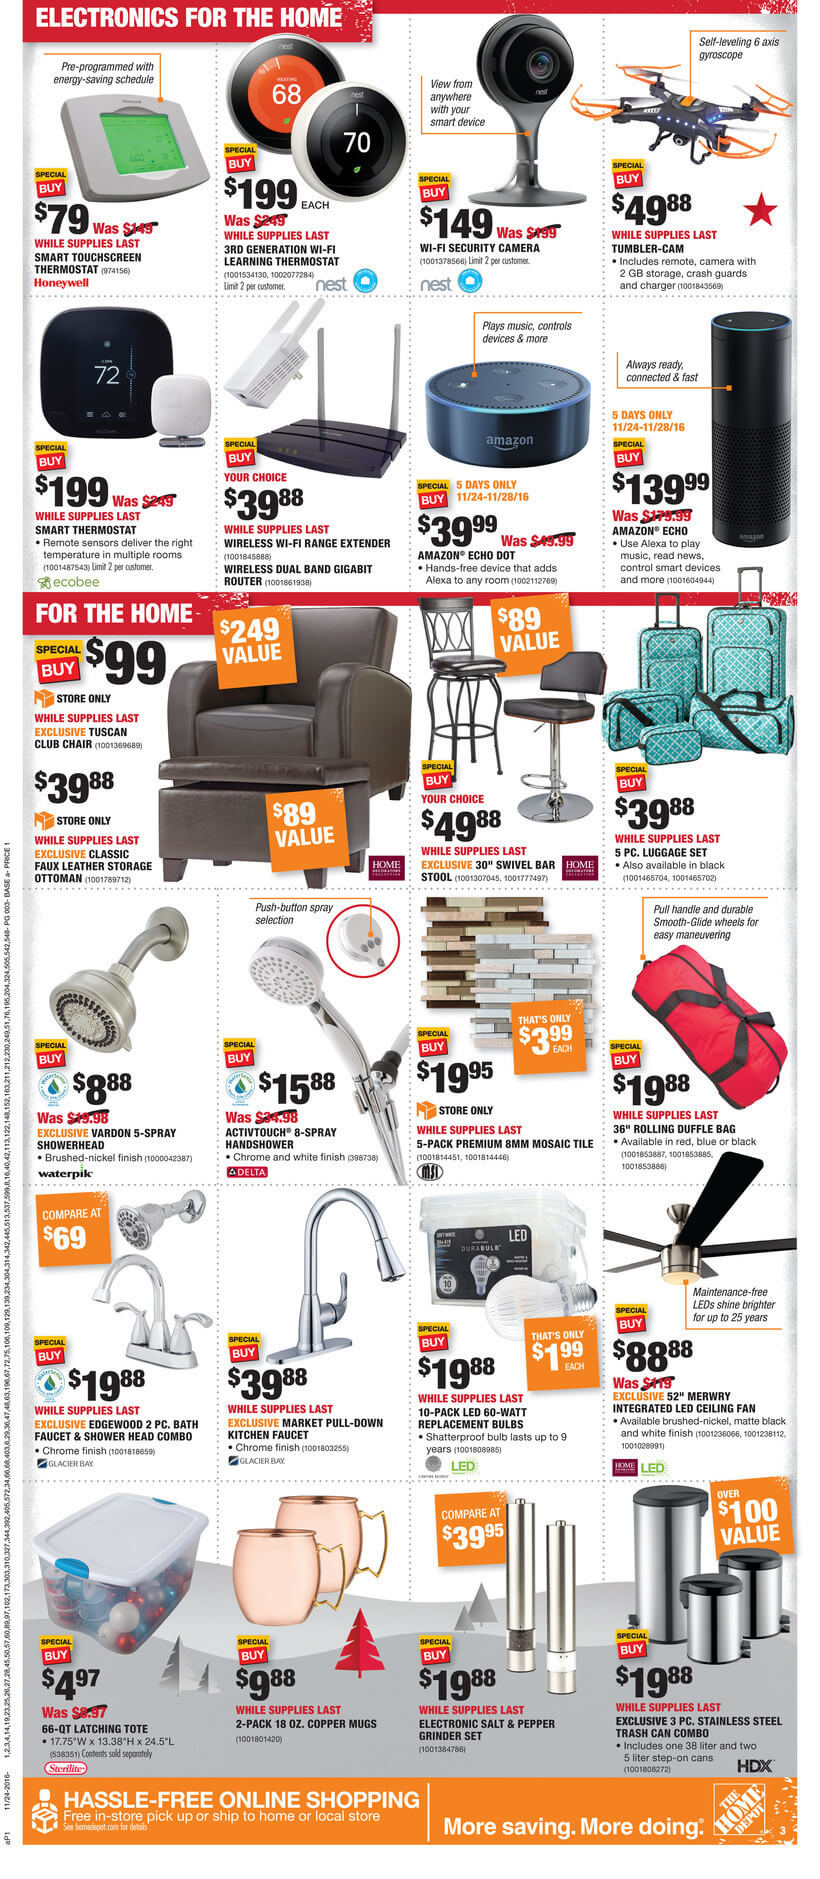 Home Depot Black Friday 2016 Ad - Page 3